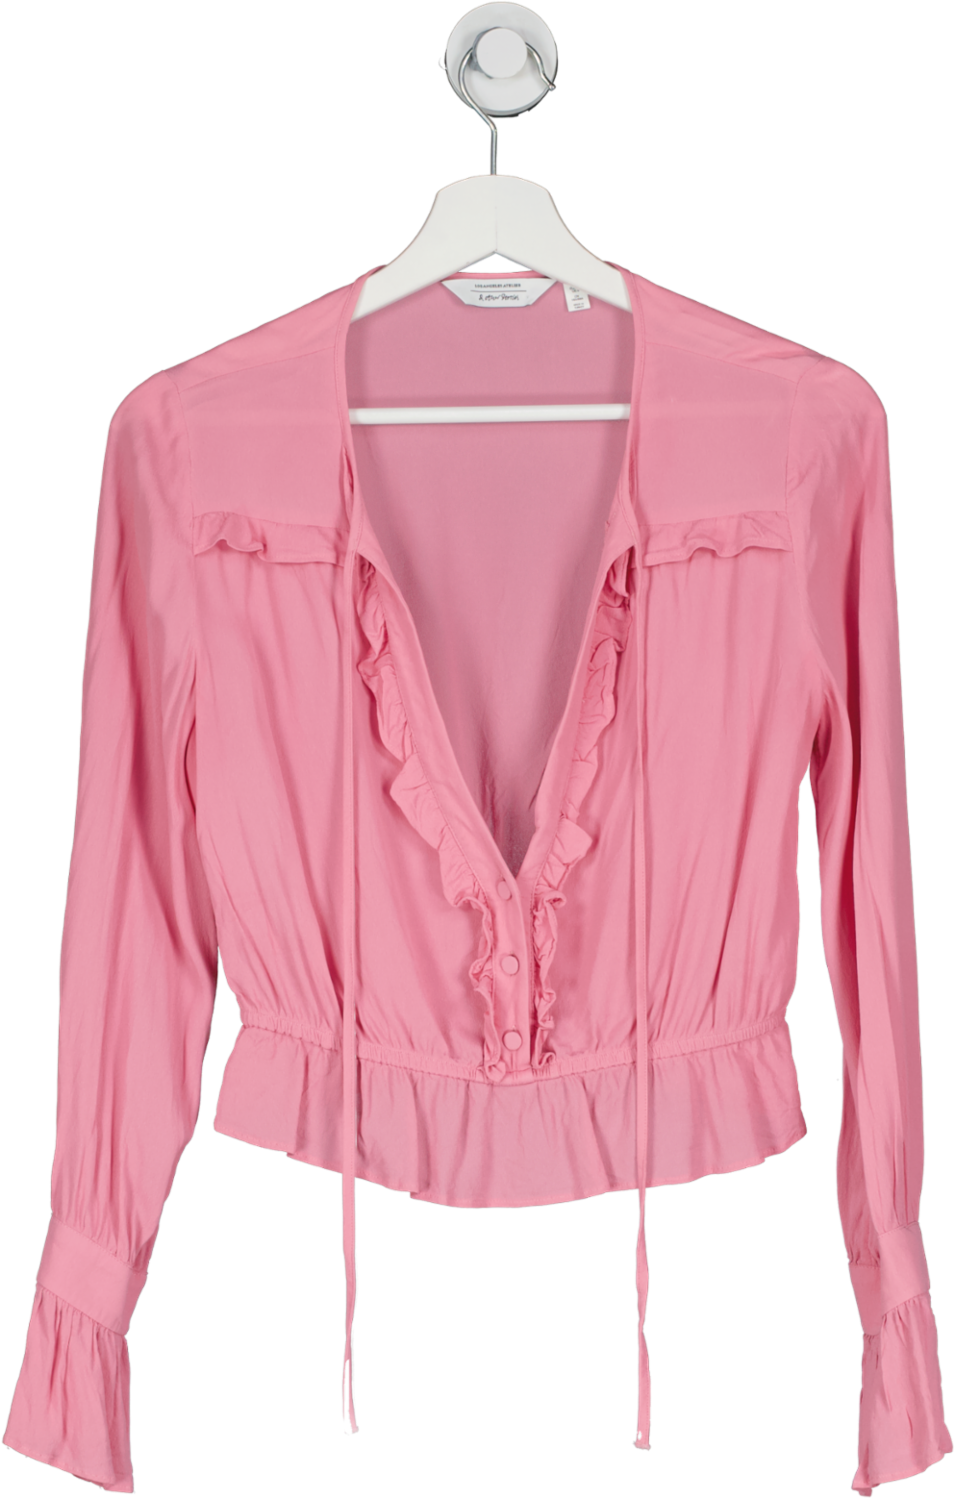 & Other Stories Pink Open Sheer Blouse UK S